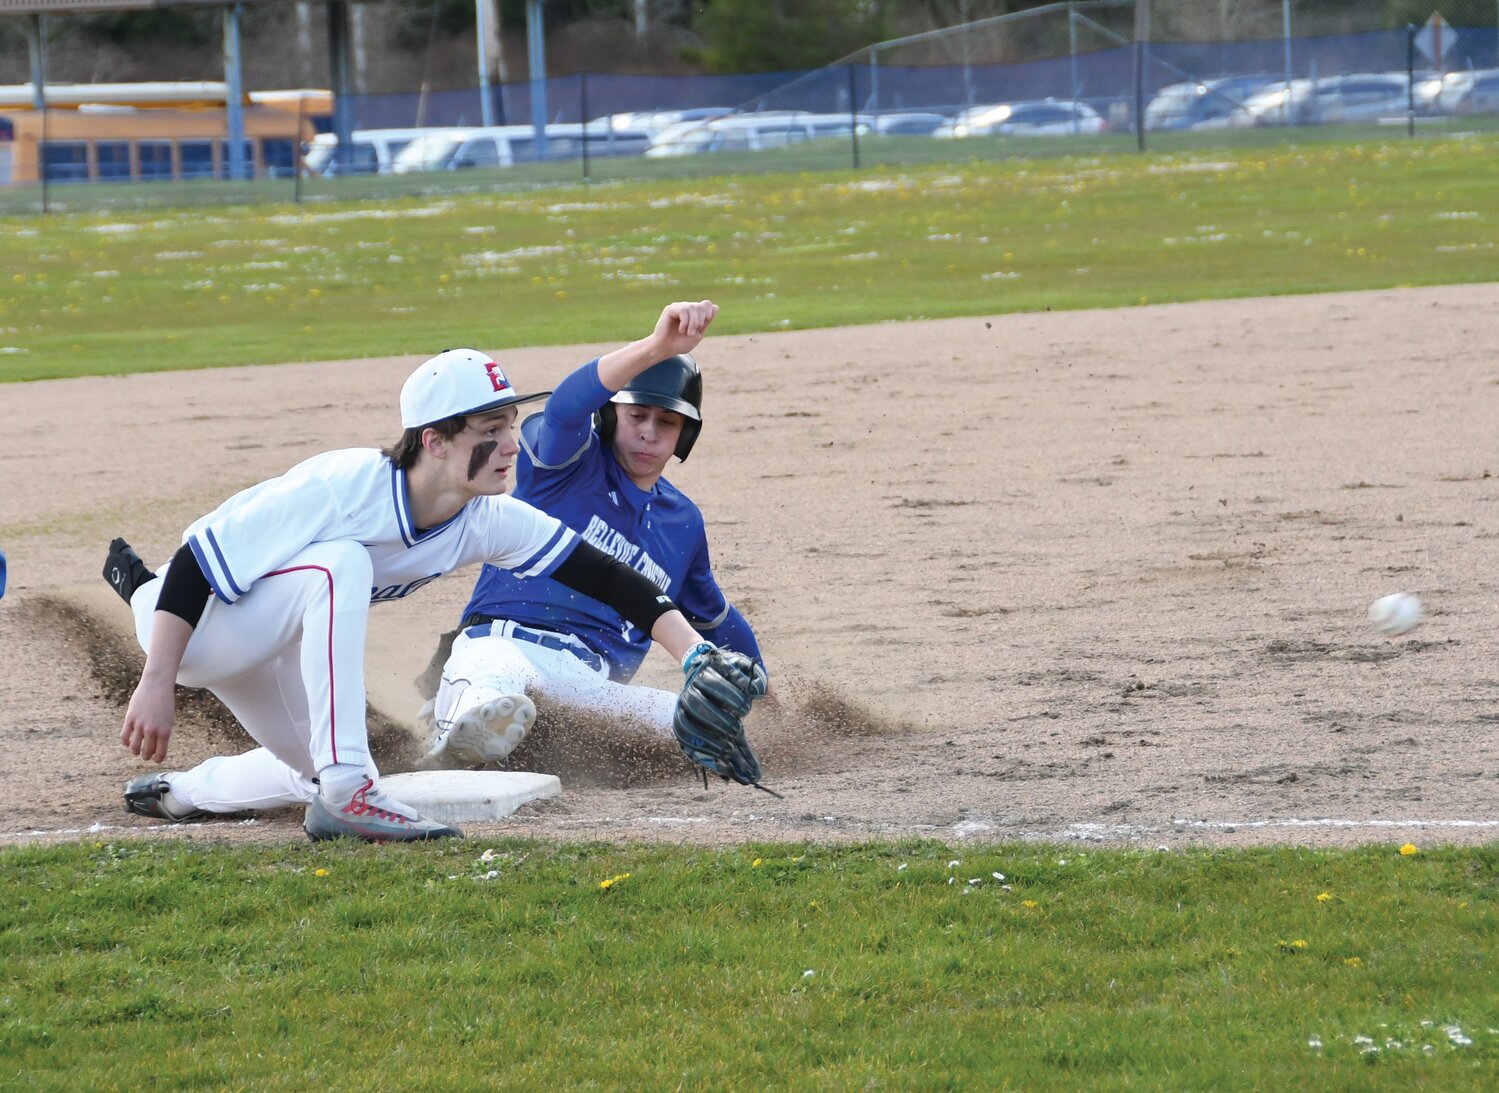 EJ junior Brody Moore prepares to snatch the ball and make the tag at third base after a Bellevue Christian player slides in to make the steal.